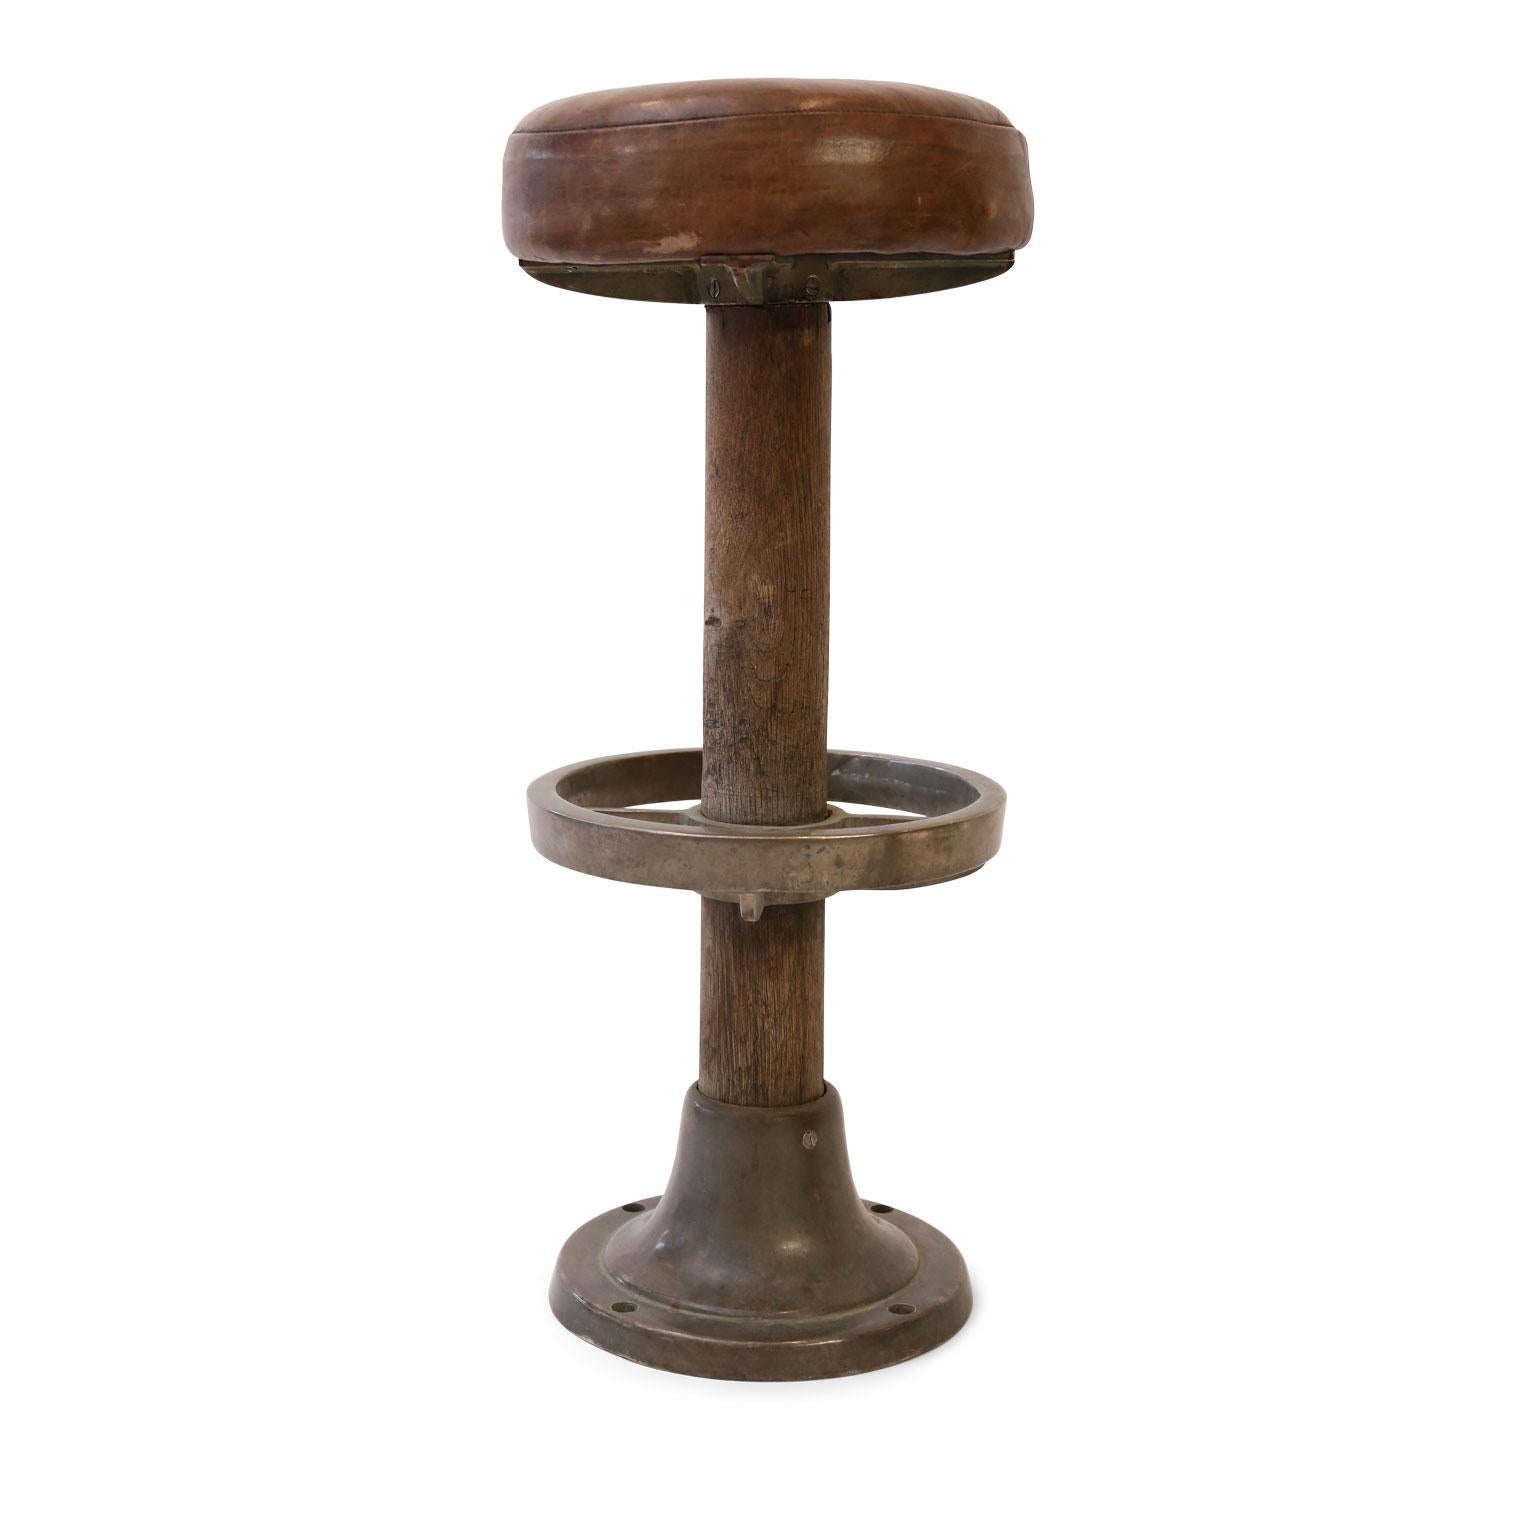 Pair of leather-covered barstools, or counter stools, (circa 1910-1940) originally from an ocean liner (large passenger ship). Seats covered in nice, old leather atop wood pedestals. Bronze-on-nickel circular foot rests and bases are both solid.